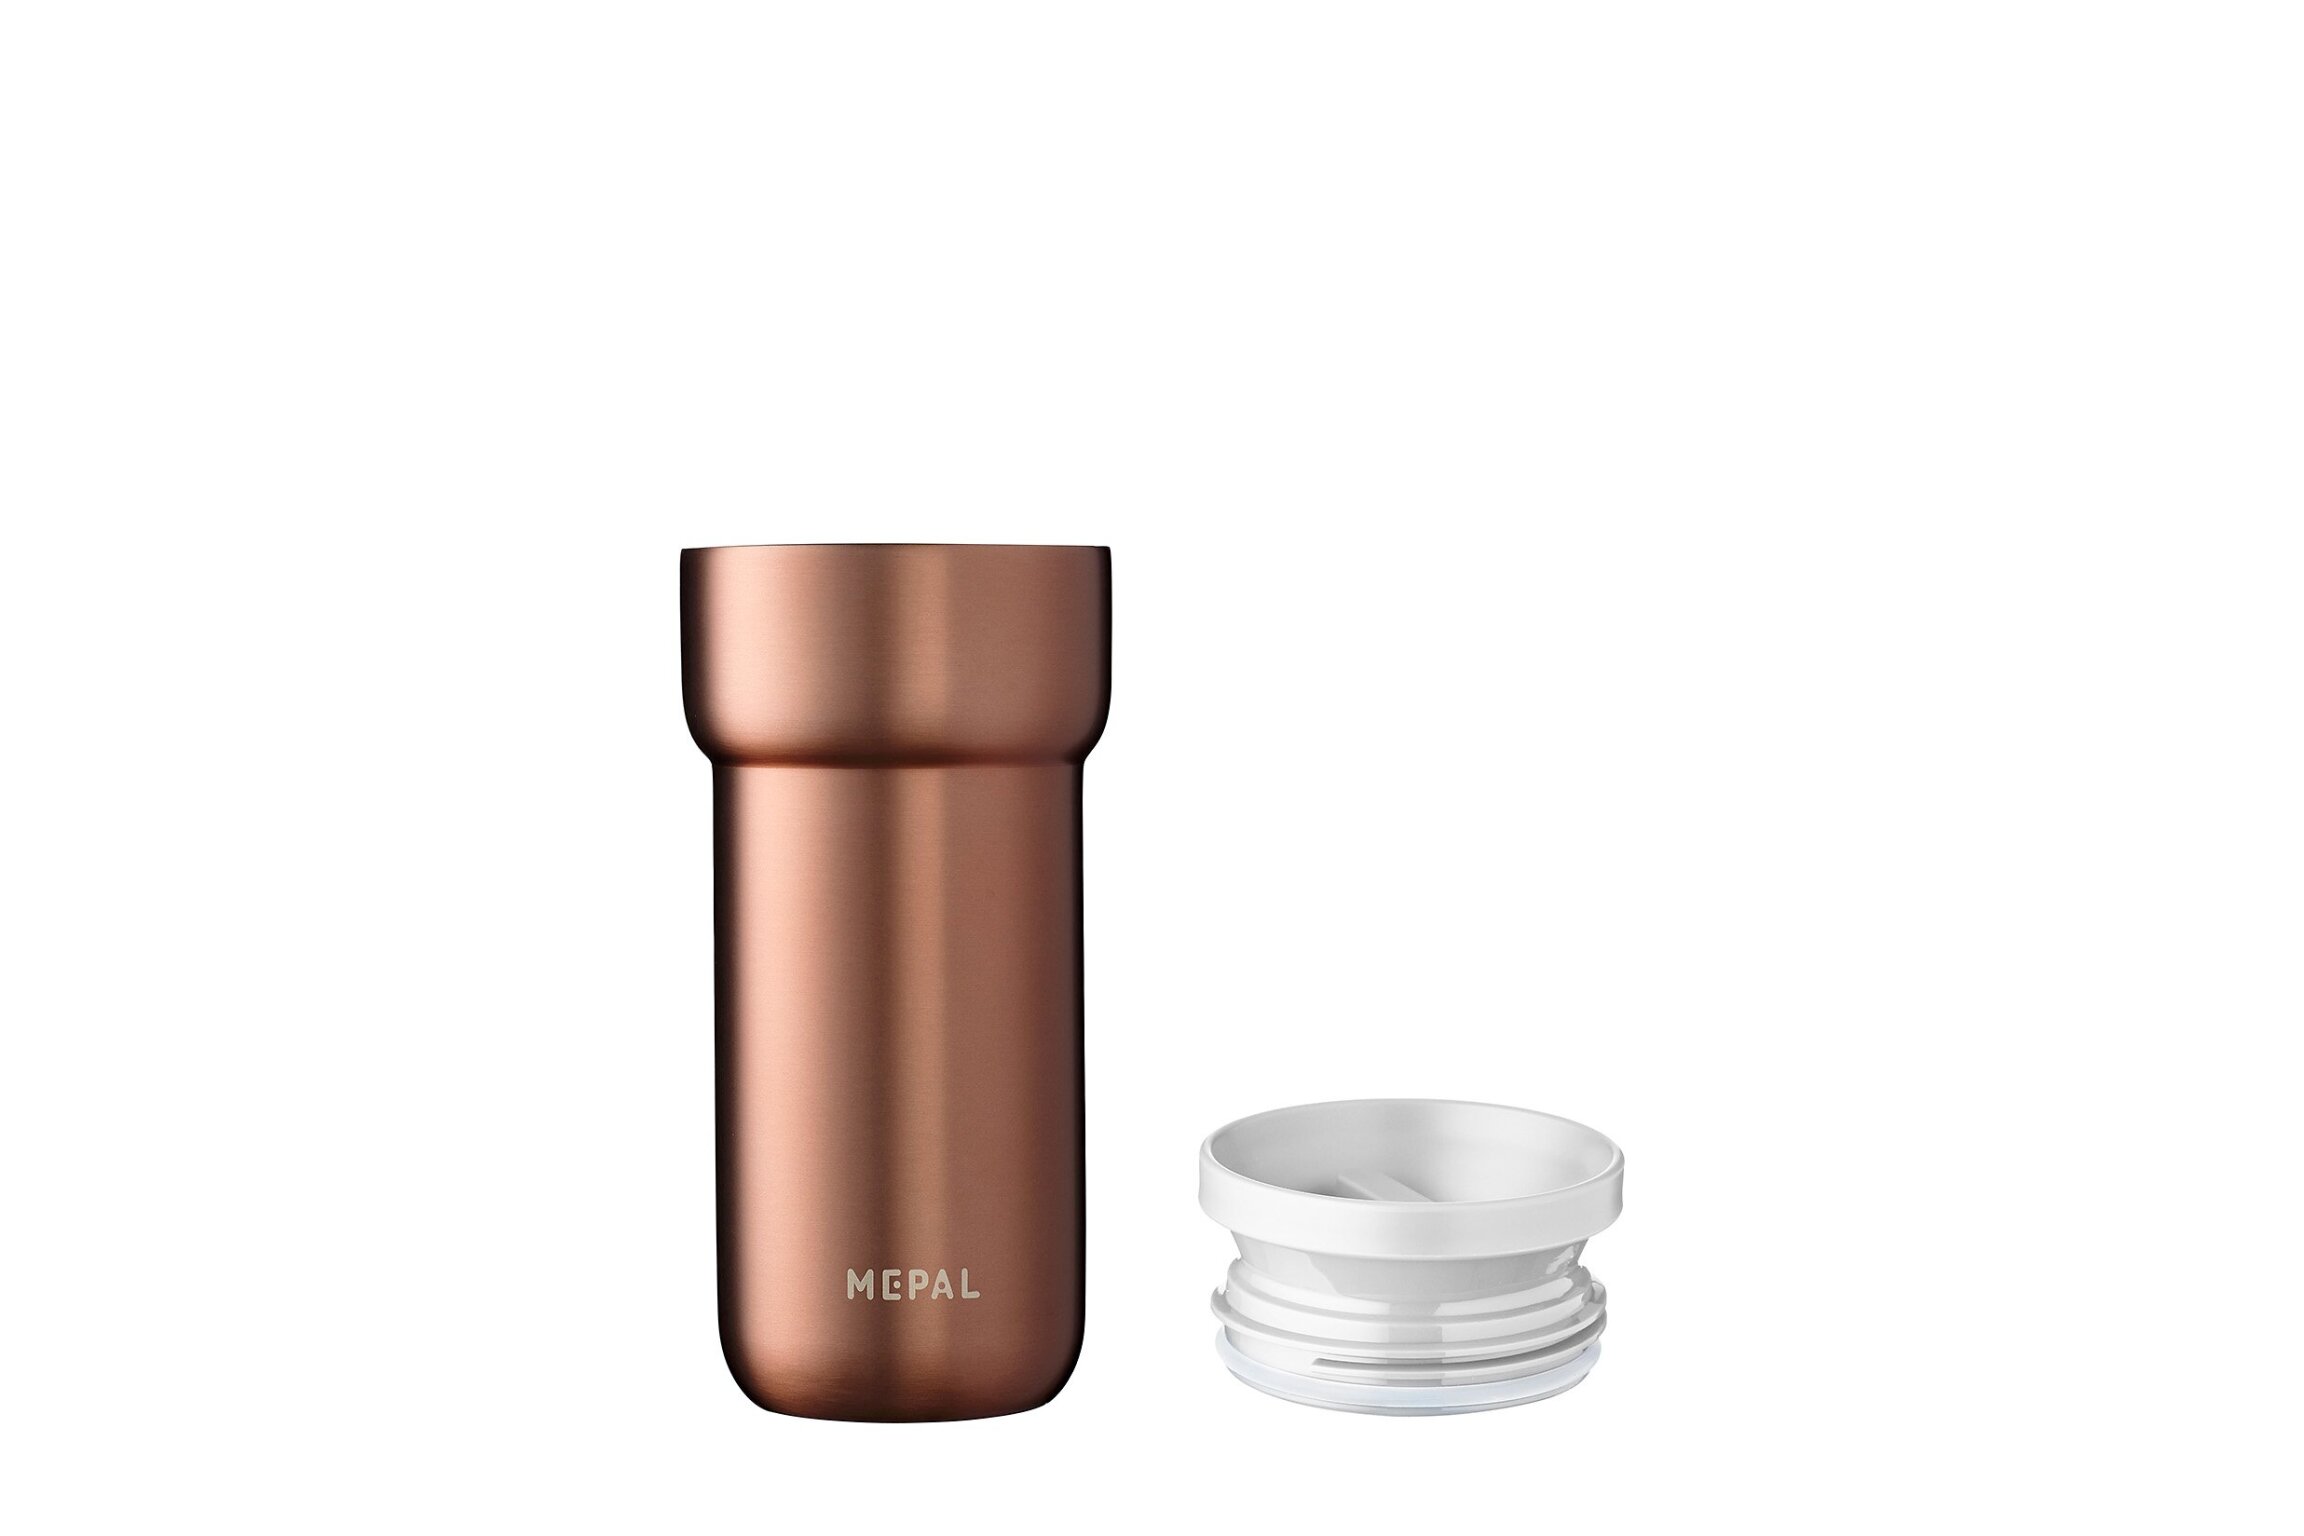 thermobecher ellipse 375 ml - rose gold